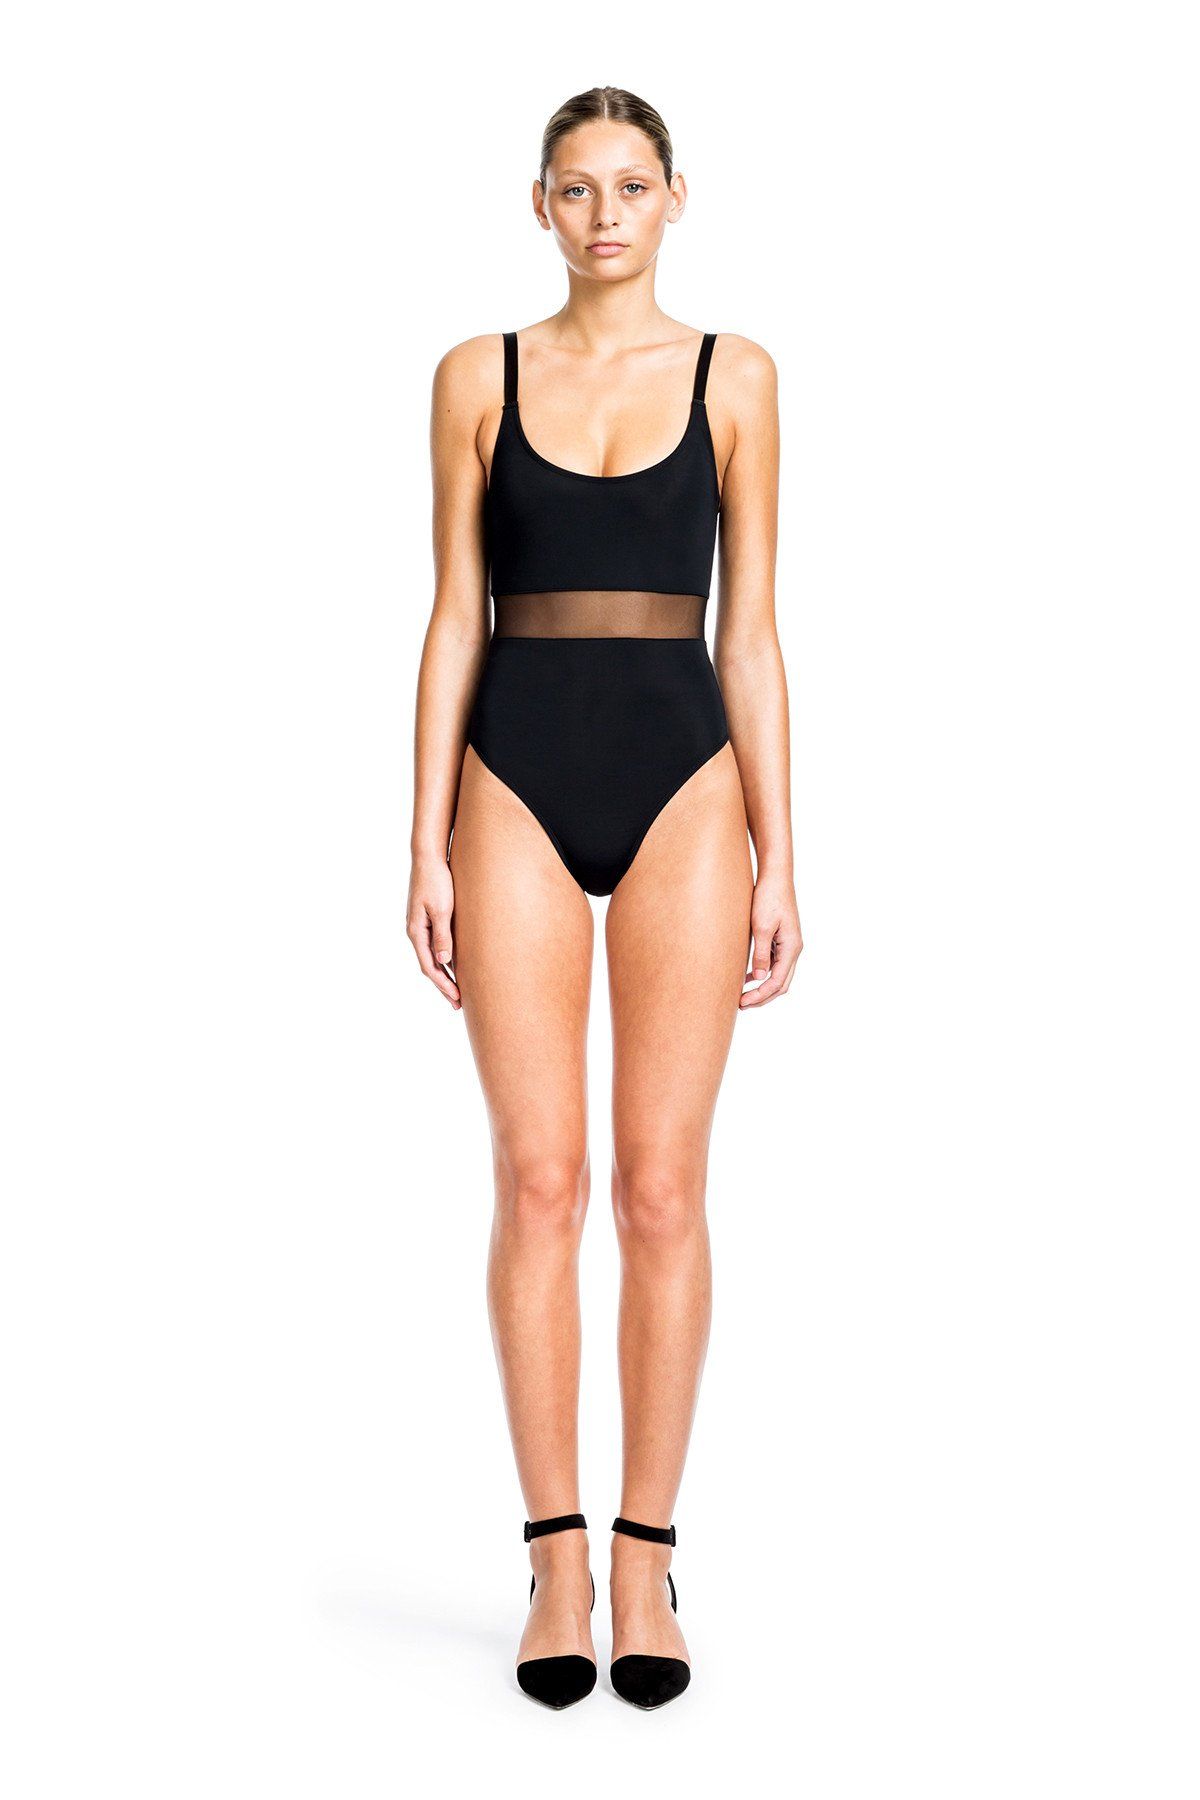 30 Monokinis That Prove They're Your New Summer Must-Have